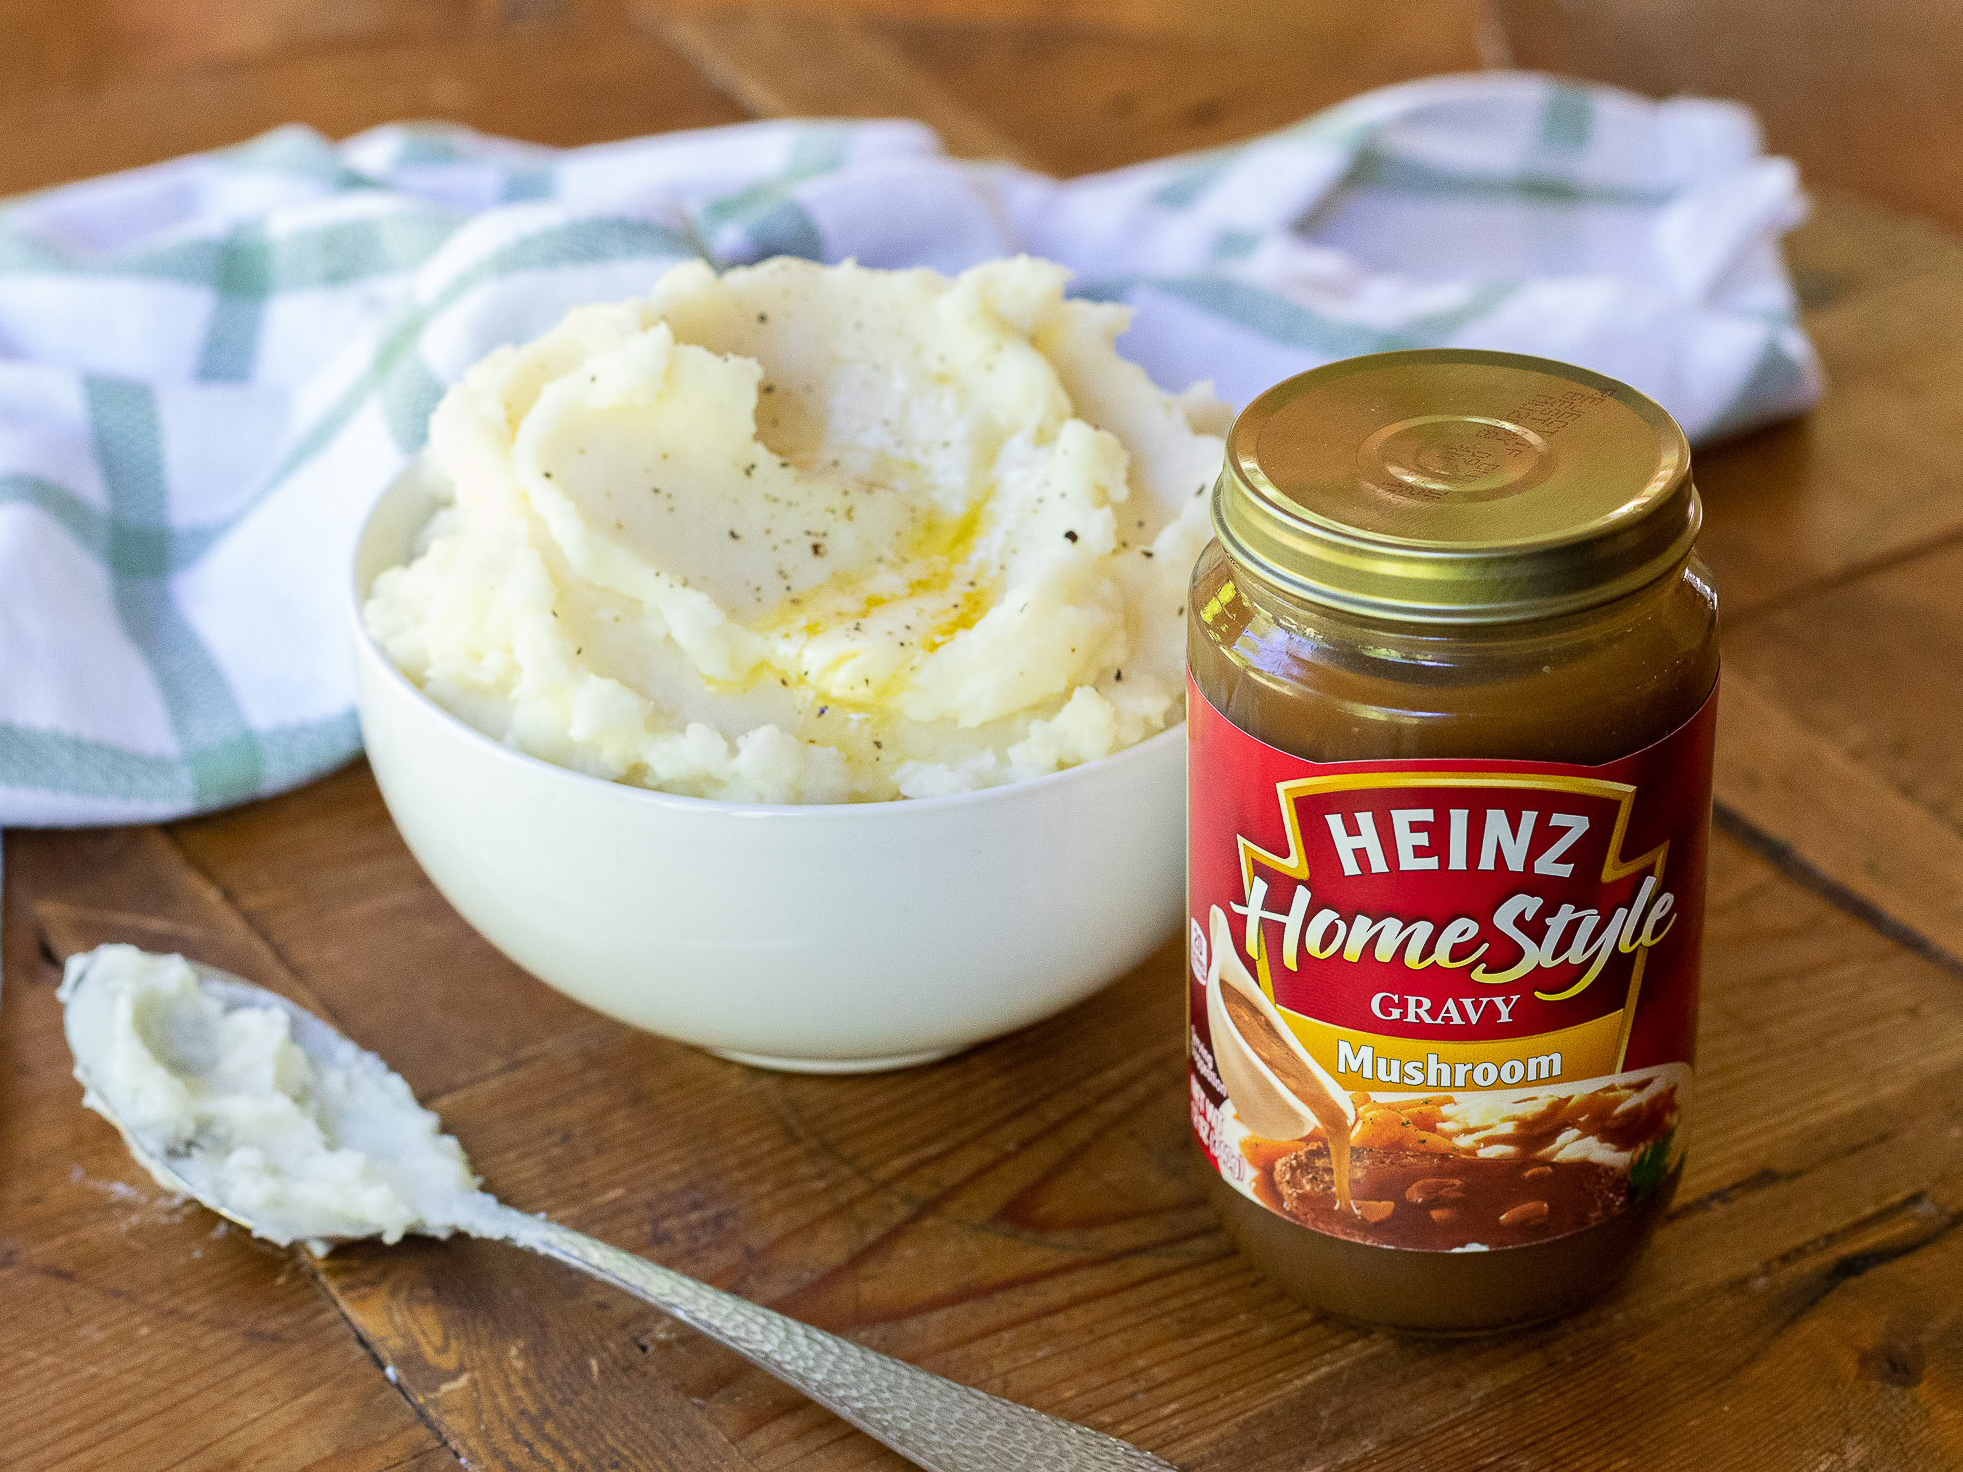 Grab The Jars Of Heinz Home Style Gravy For Just $1.50 At Publix